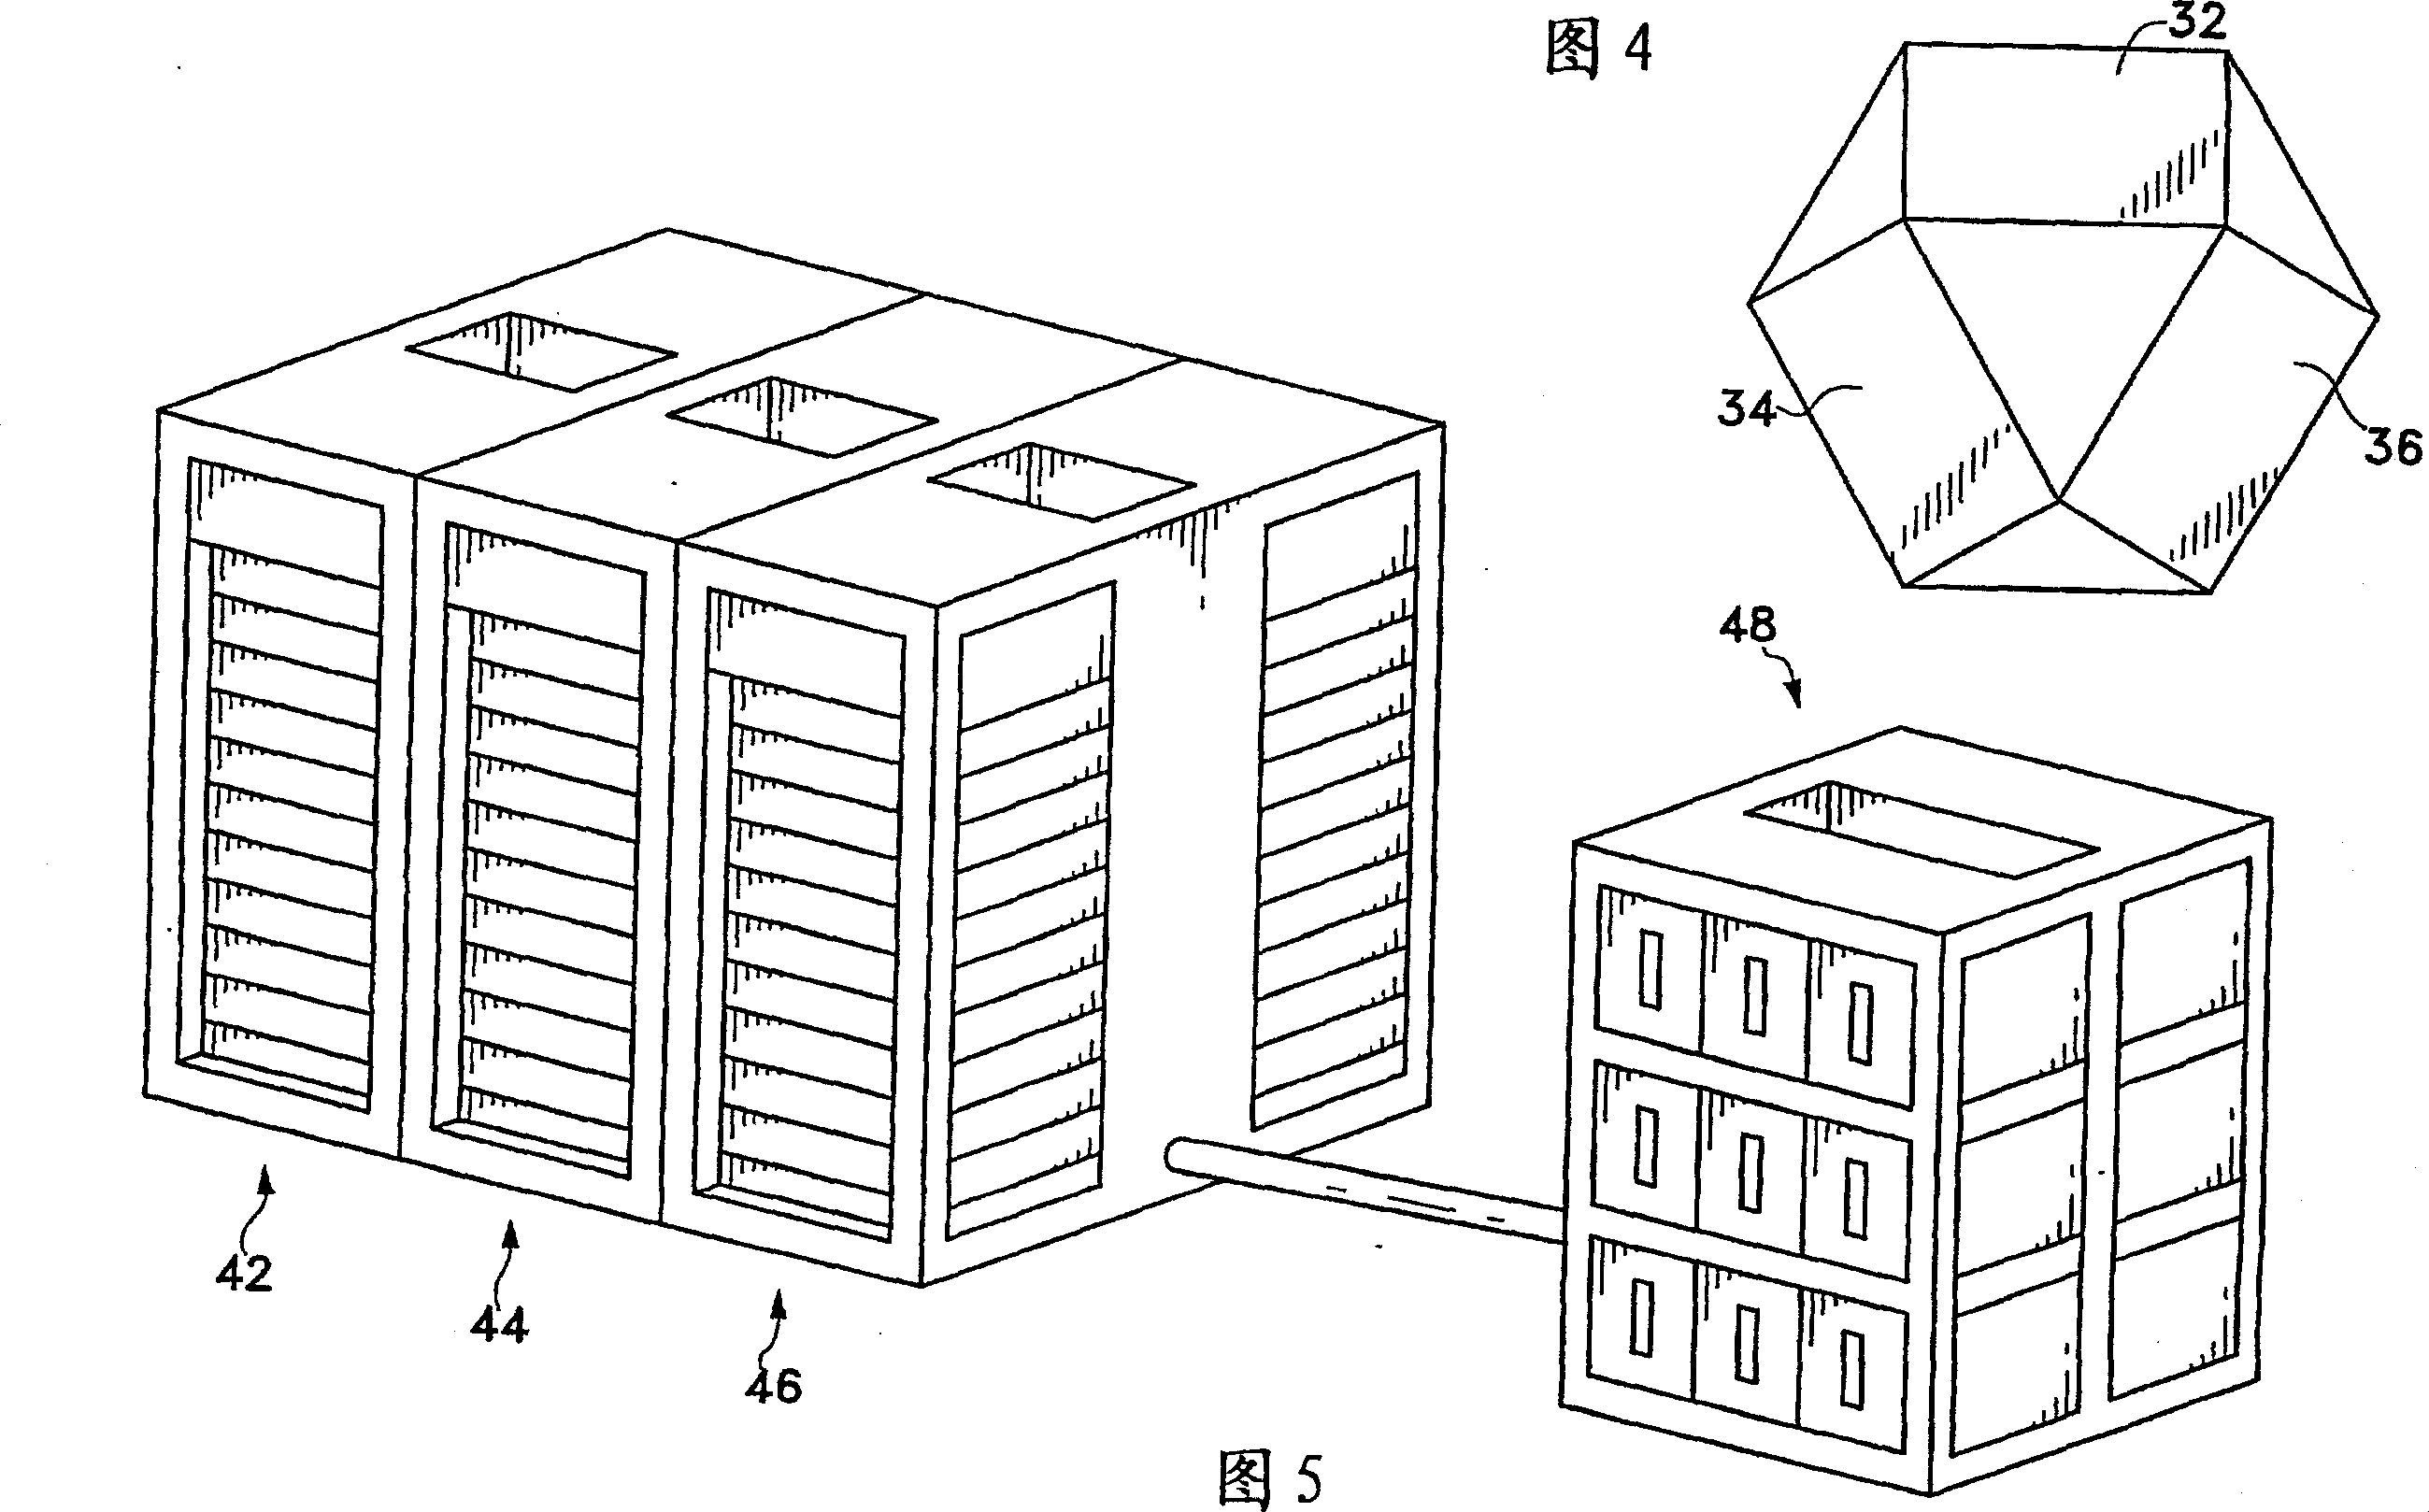 Computer rack with power distribution system